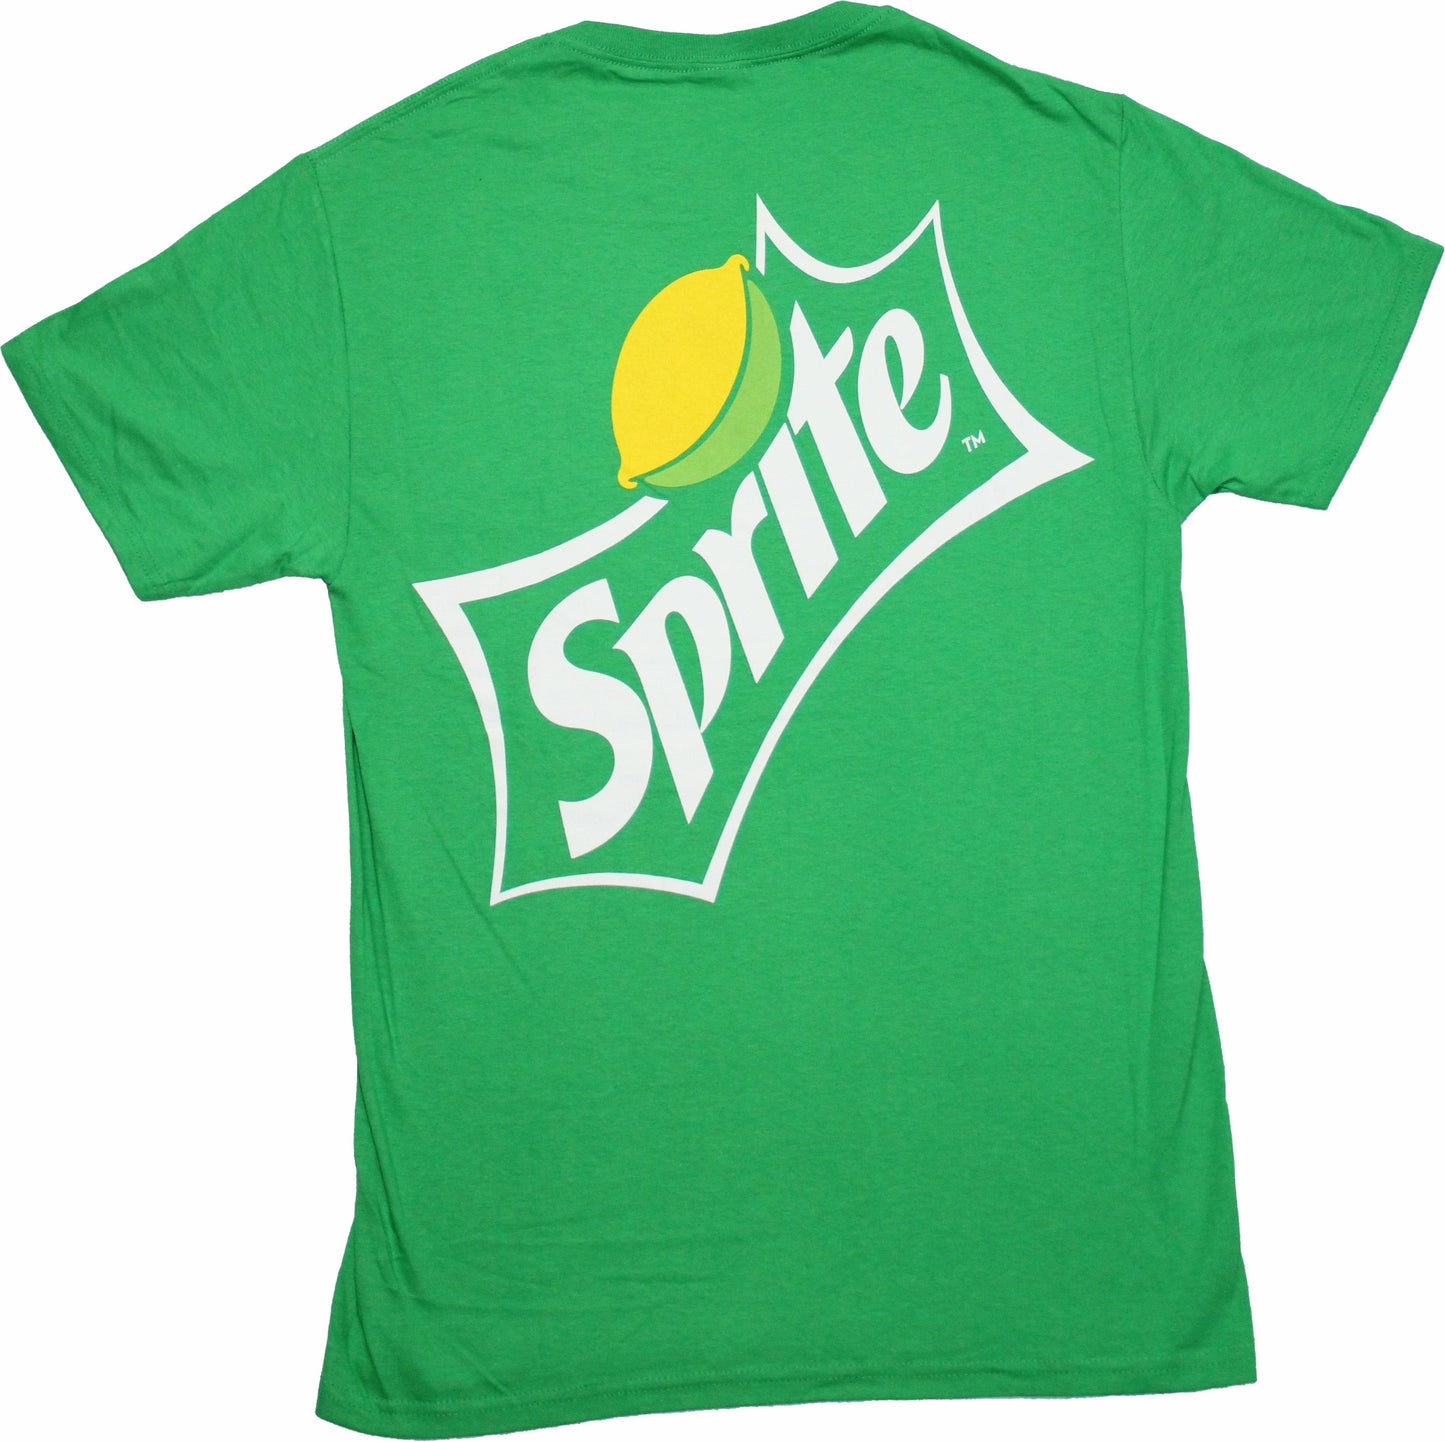 Men's Green Sprite Obey Your Thirst Tee T-Shirt